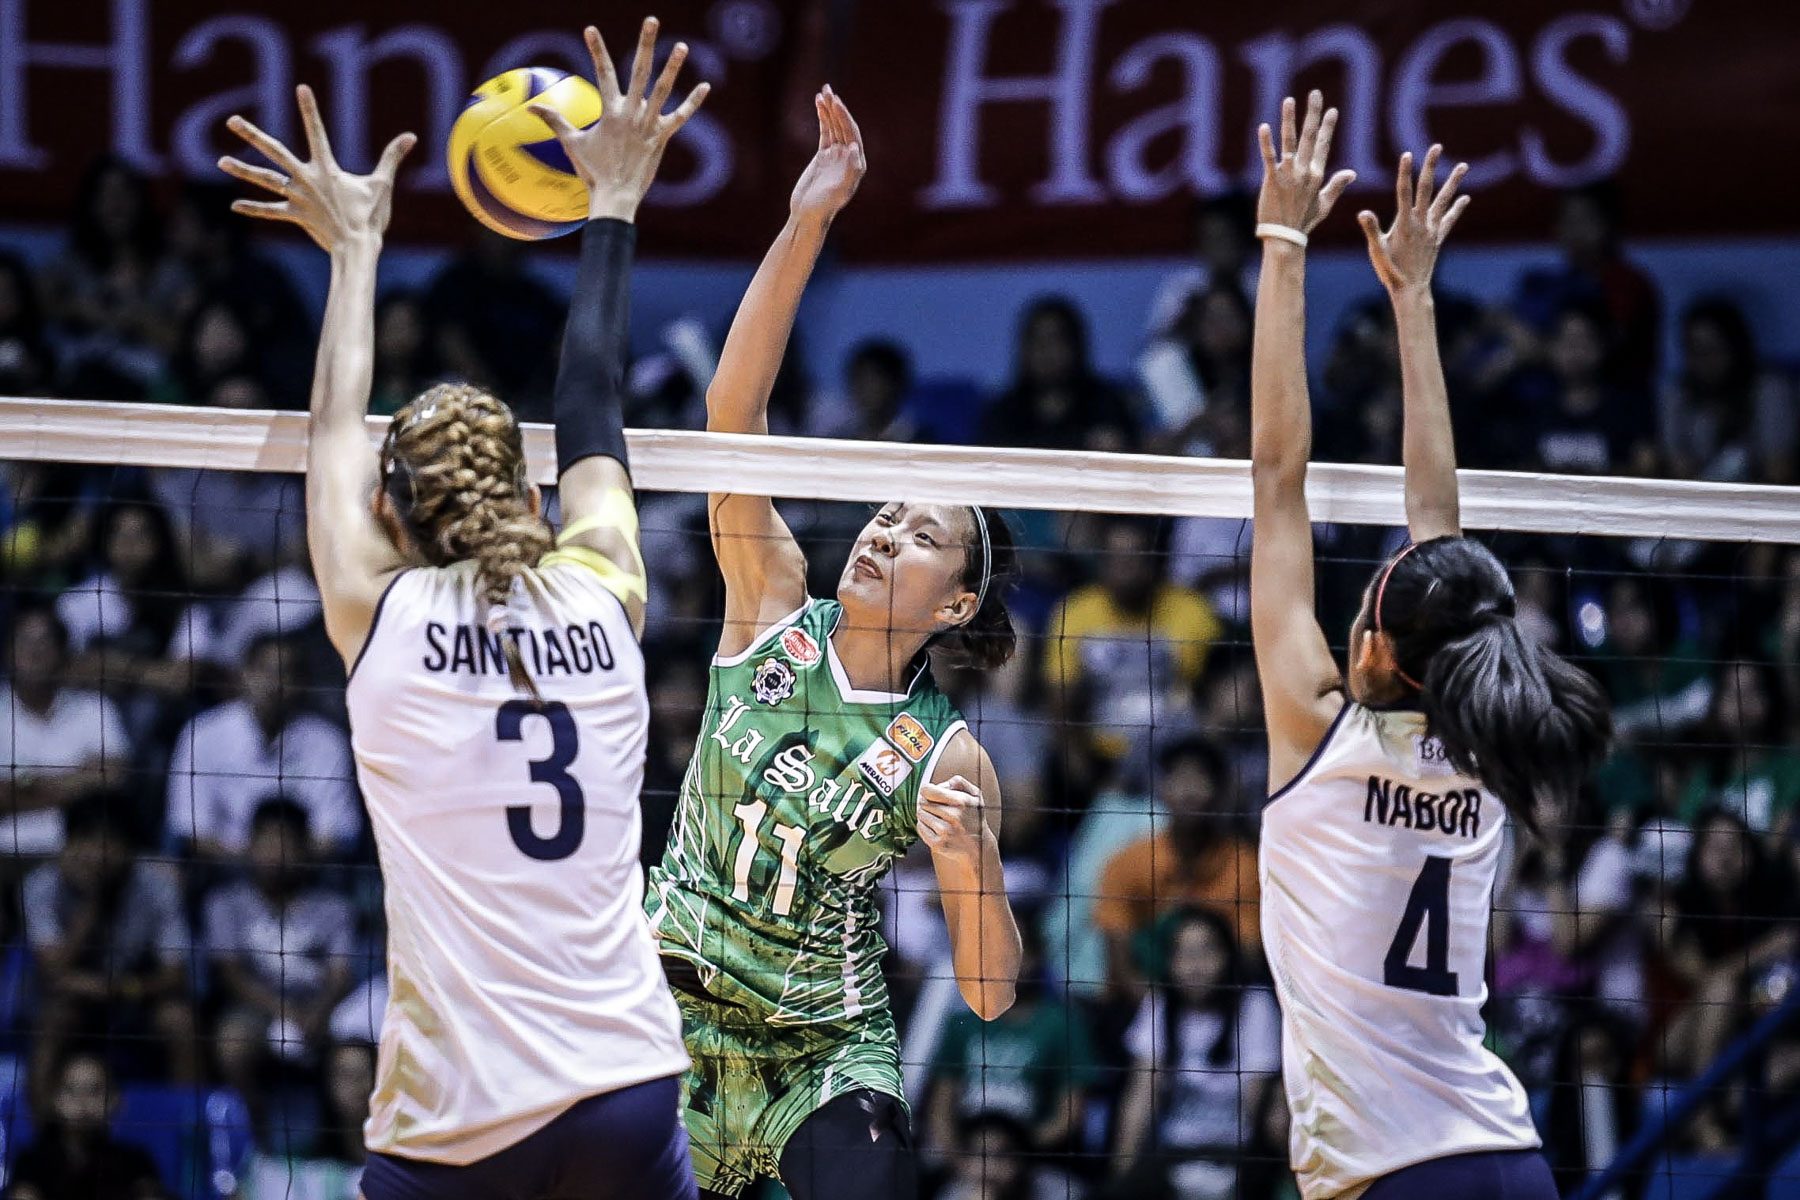 Nothing motivates the Lady Spikers like defeat, says Kim Dy. Photo by Josh Albelda/Rappler  